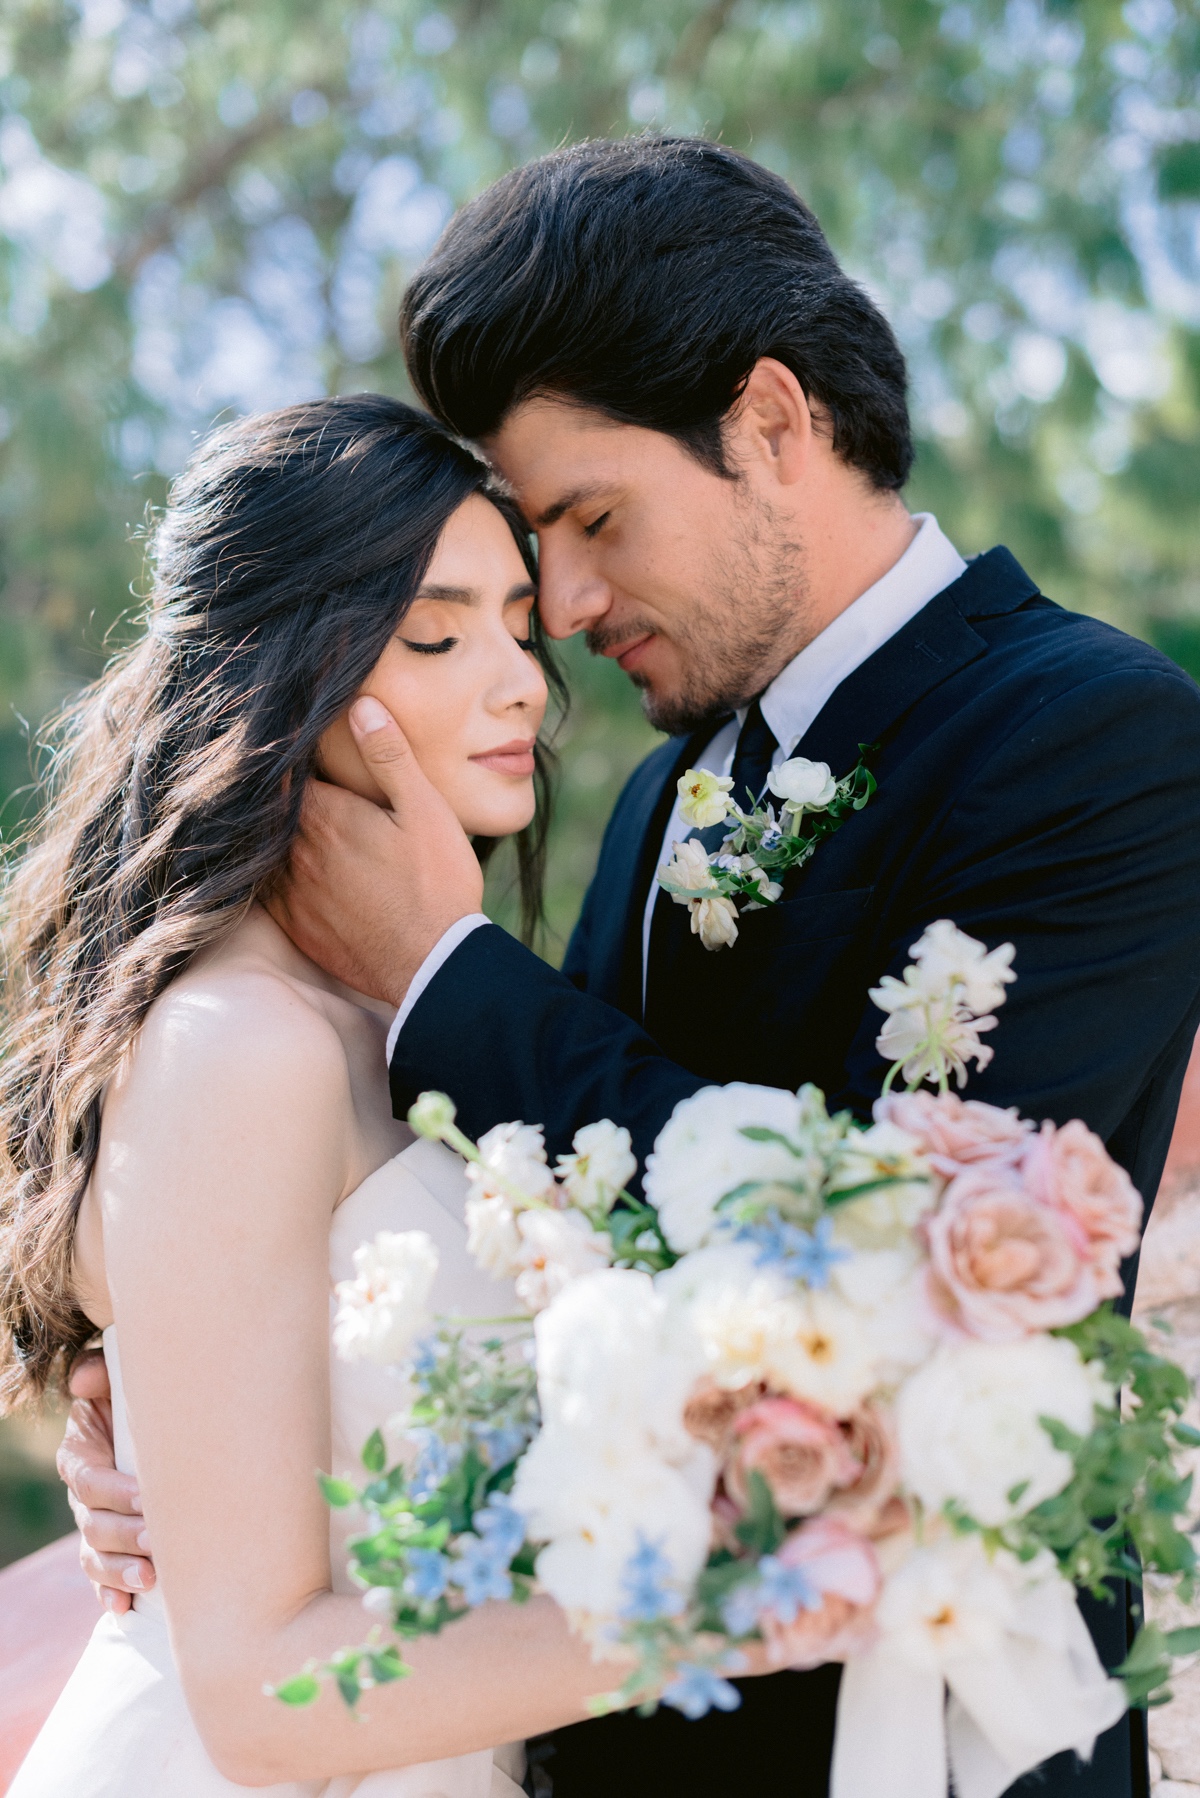 Modern Wedding at Fire Station in Southern California￼ - Bakersfield, CA -  Love & Lavender - BOB体育下